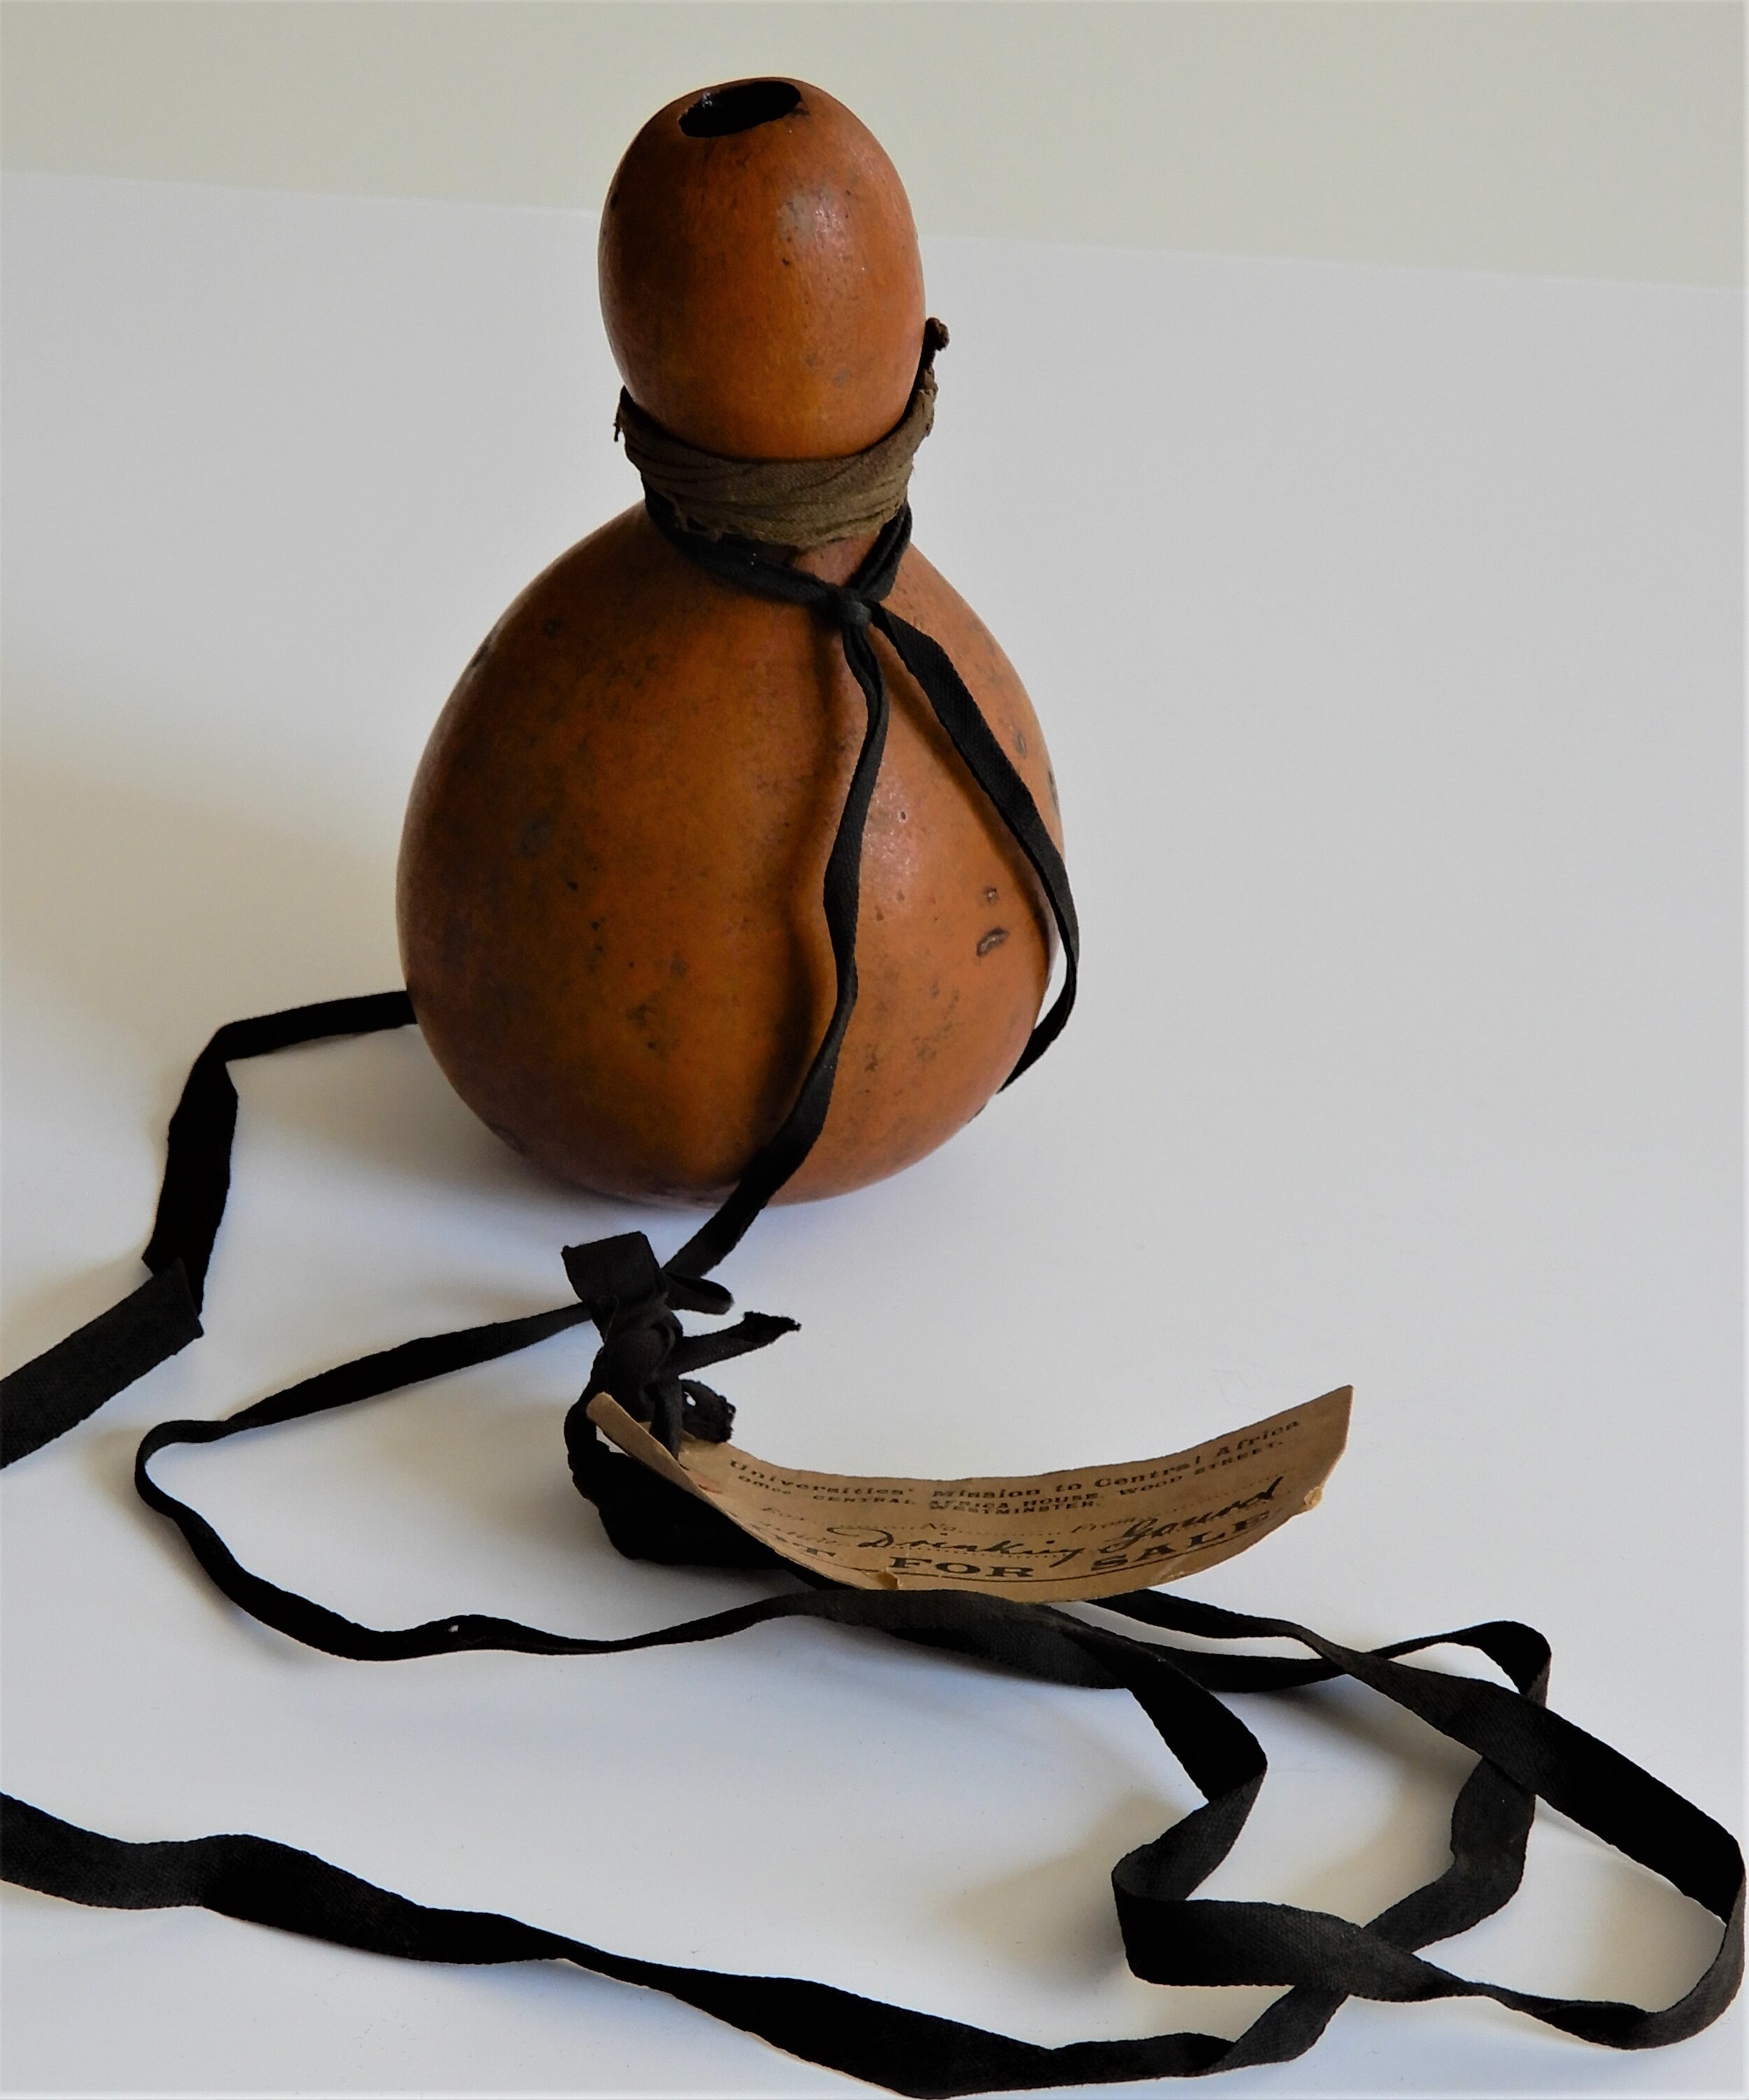  A medium brown gourd which has one large bulbous shape at the bottom and a more elongated slimmer bulbous shape at the top. At the narrowest point there is a leather strip wrapped around it. The gourd sits on white protective wrapping paper. 